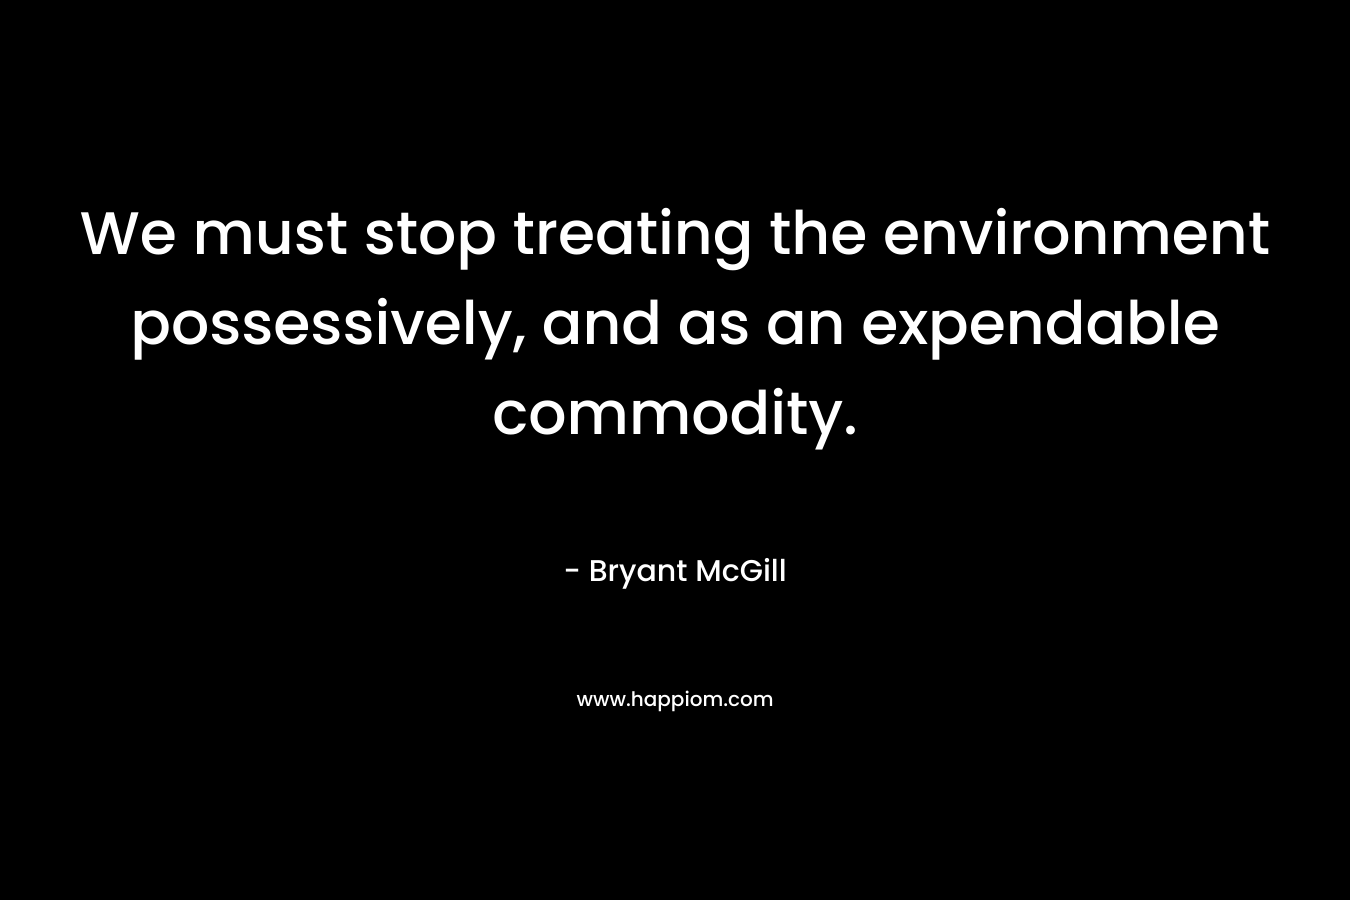 We must stop treating the environment possessively, and as an expendable commodity. – Bryant McGill